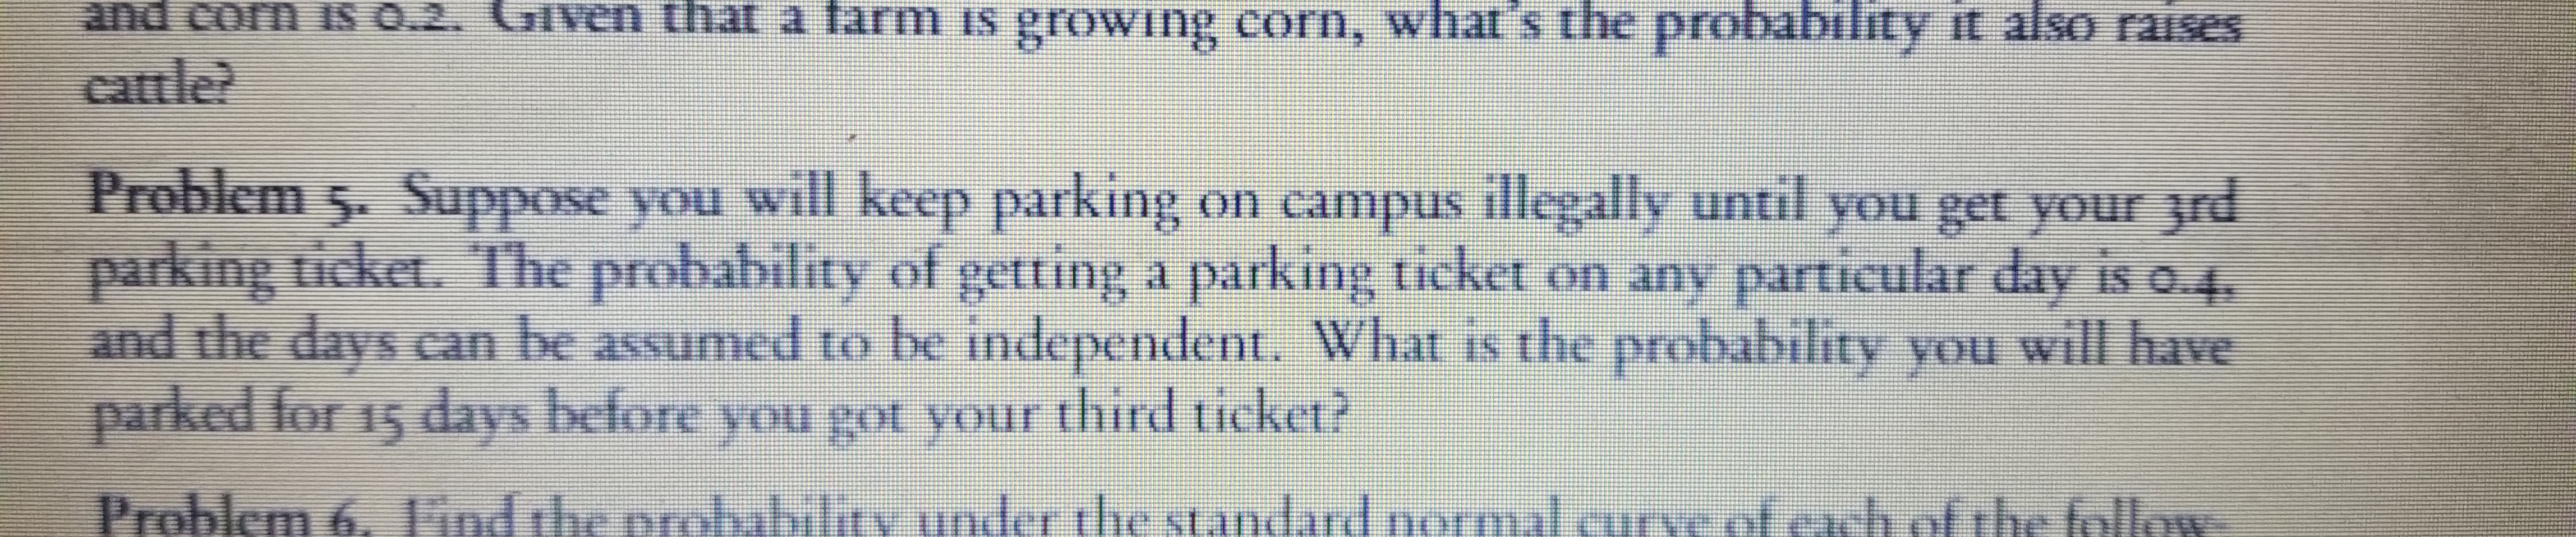 and corn is 0.2. Given that a farm is growing corn, what's
the probabilıty it also raIses
cattle?
Problem 5. Suppose you will keep parking on campus illegally until you get your 3rd
parking ticket. The probability of getting a parking ticket on any particular day is o.4
and the days can be assumed to be independent. What is the probability you will have
parked for 15 days before you got your third ticket?
Problem 6. Tnd the
e prelvibliny under the standard normali
ofewh of the follow
